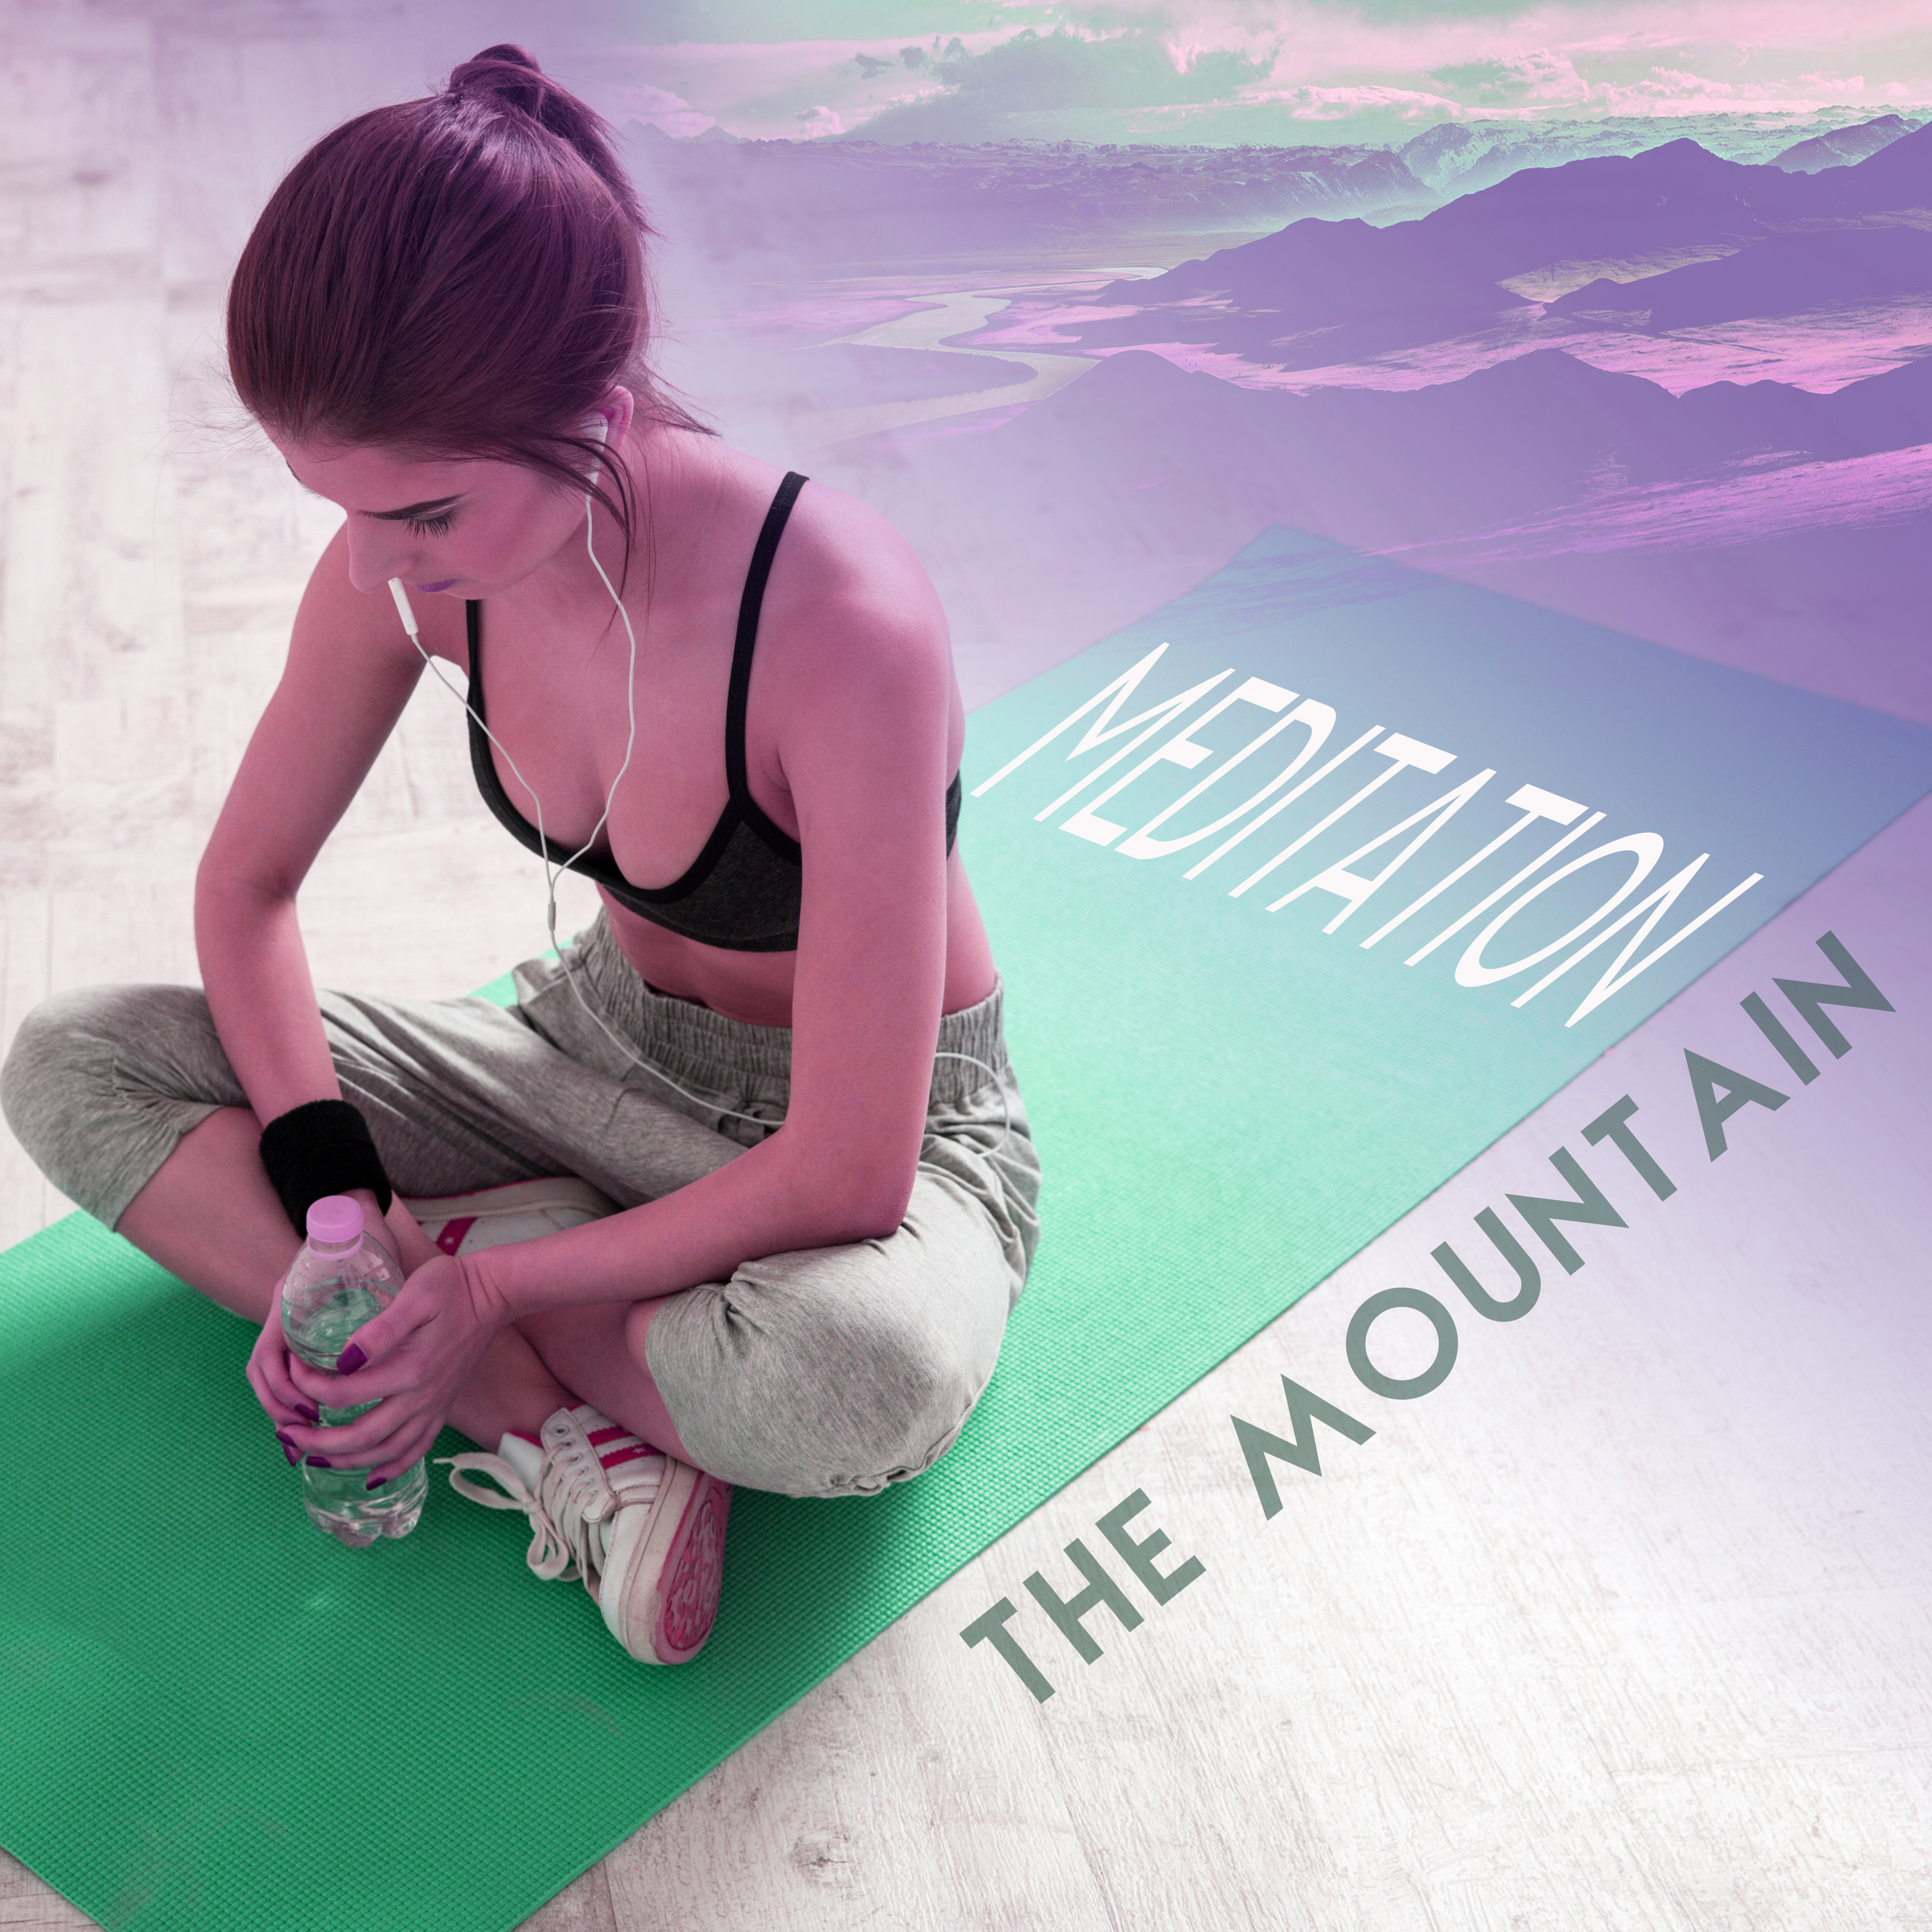 Meditation the Mountain – Natural Sounds for Meditation, Yoga Hits 2017, Calm of Mind, Relaxed Body & Mind